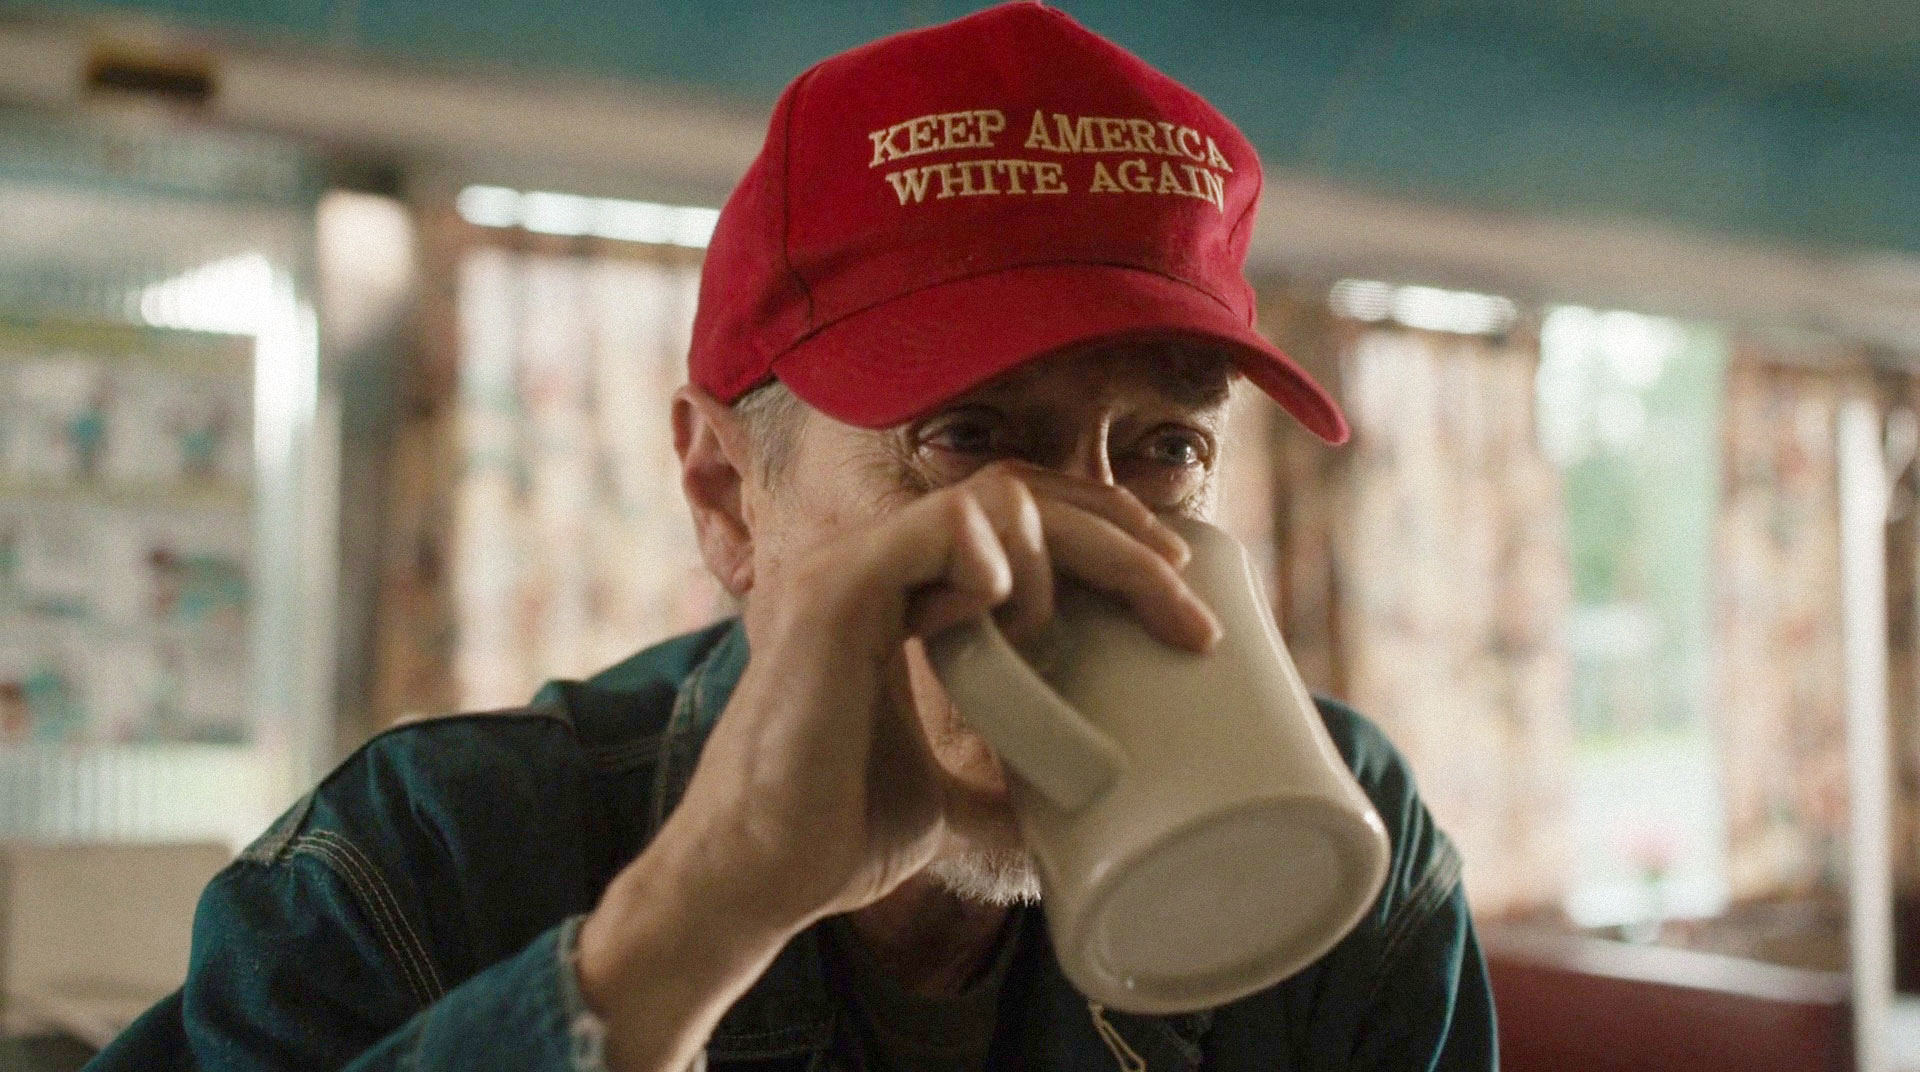 white man drinking coffee and wearing a red hat that says Keep America White Again